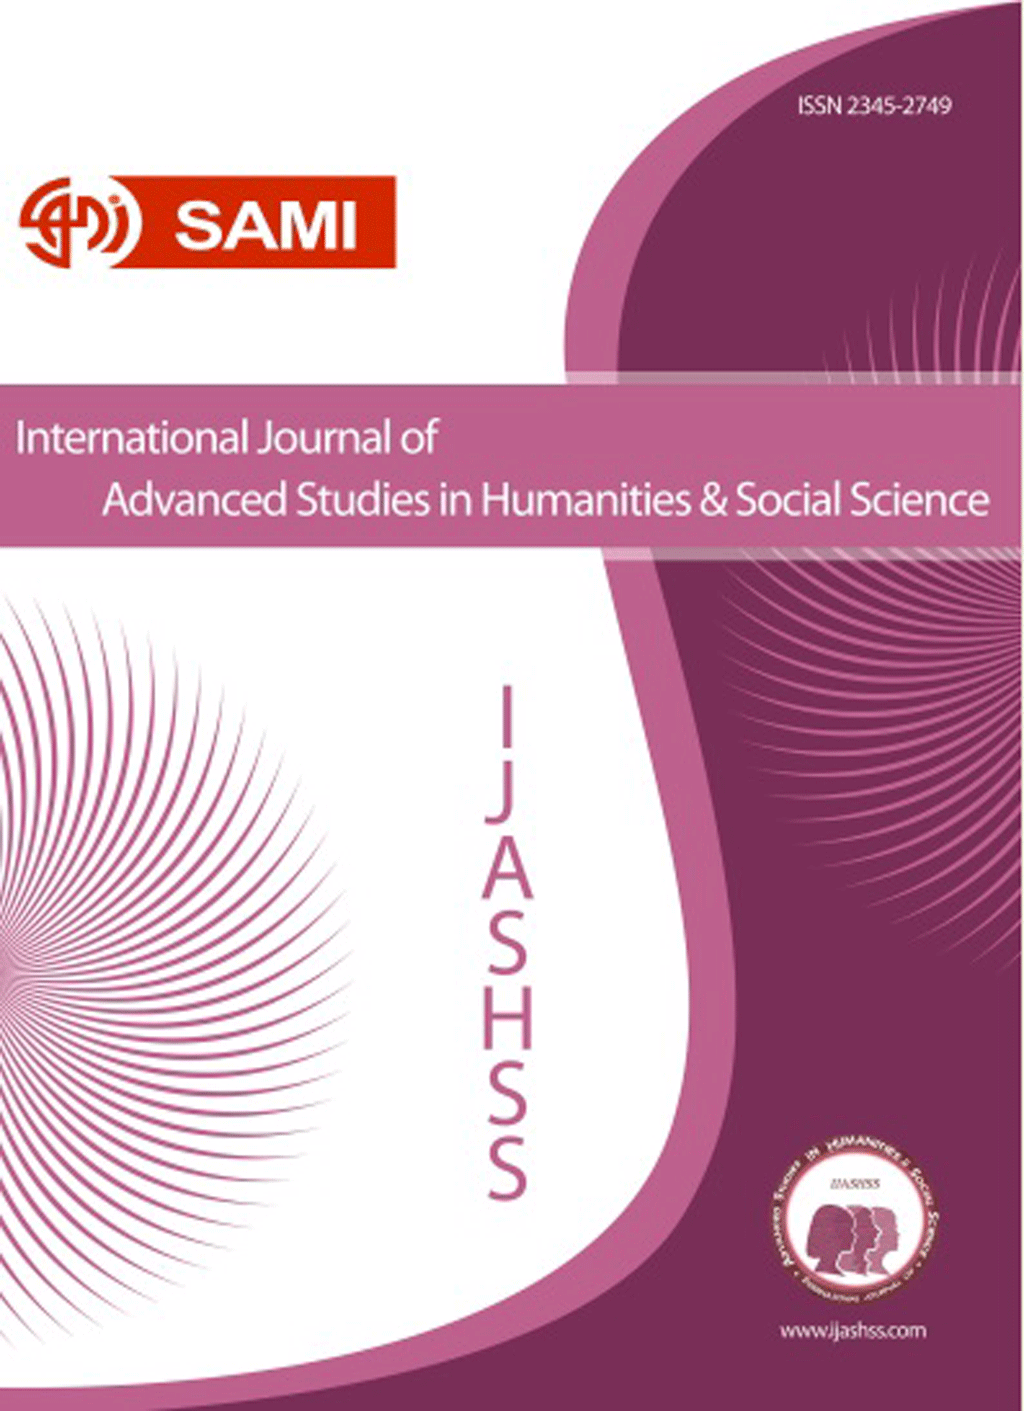 International Journal of Advanced Studies in Humanities and Social Science - July 2019, Volume 8 - Issue 3